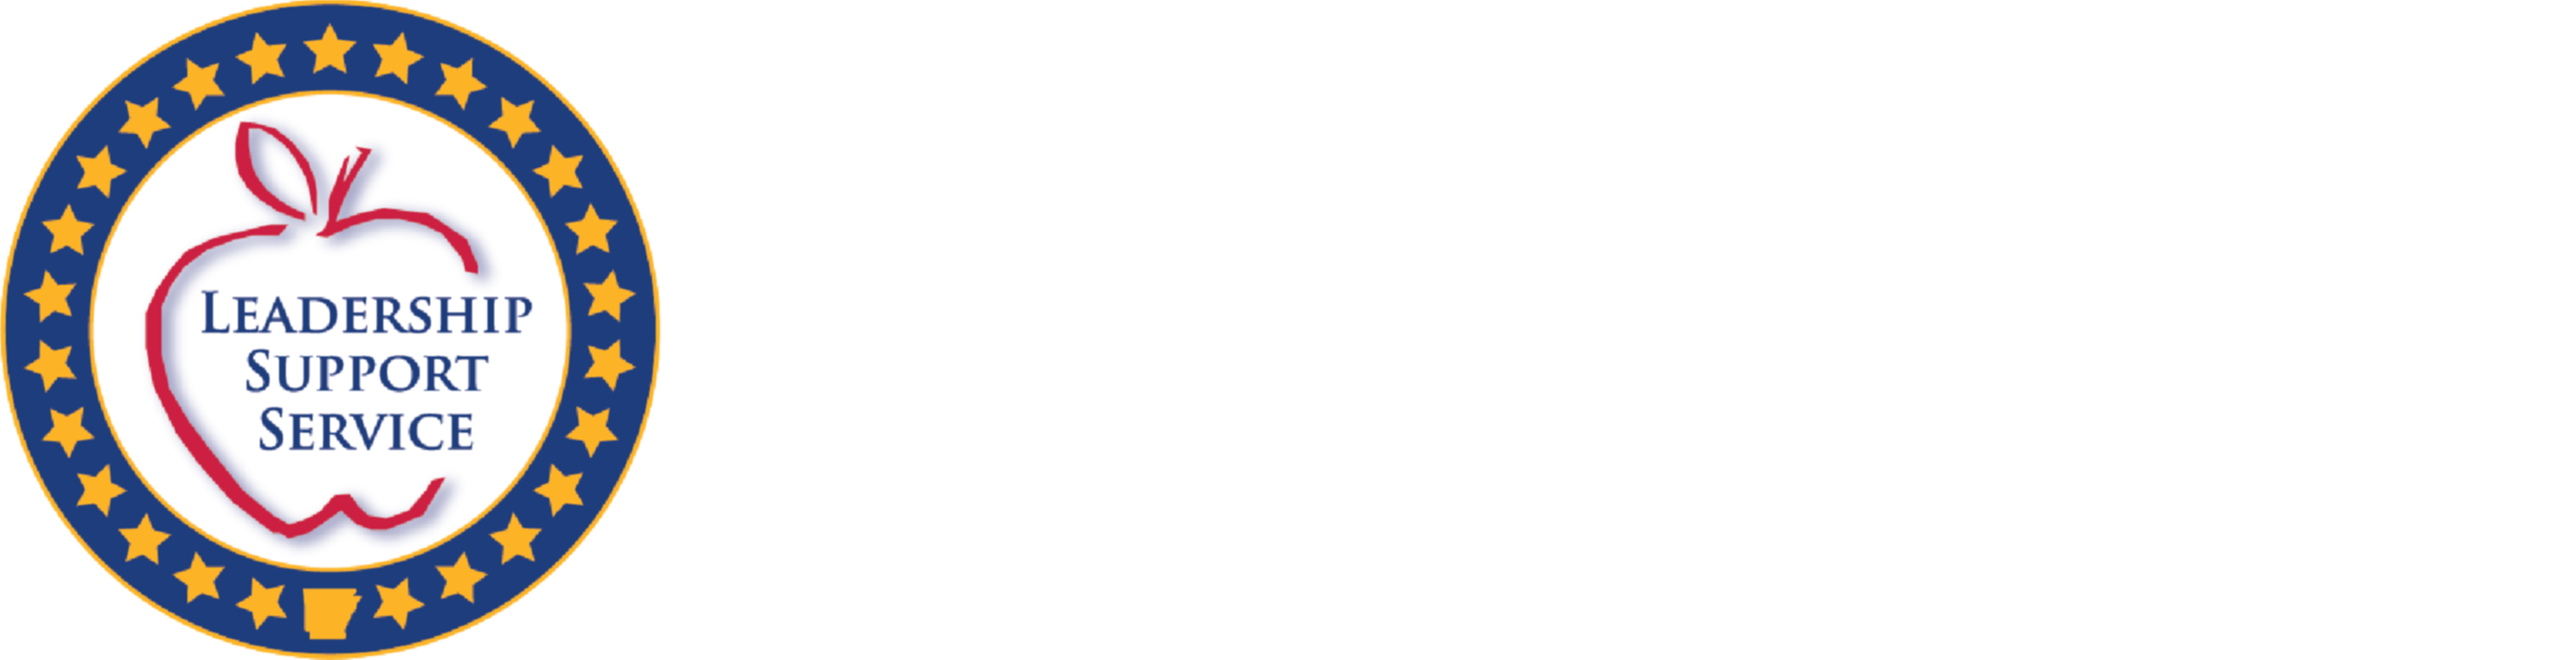 Department of Elementary and Secondary Education state required information